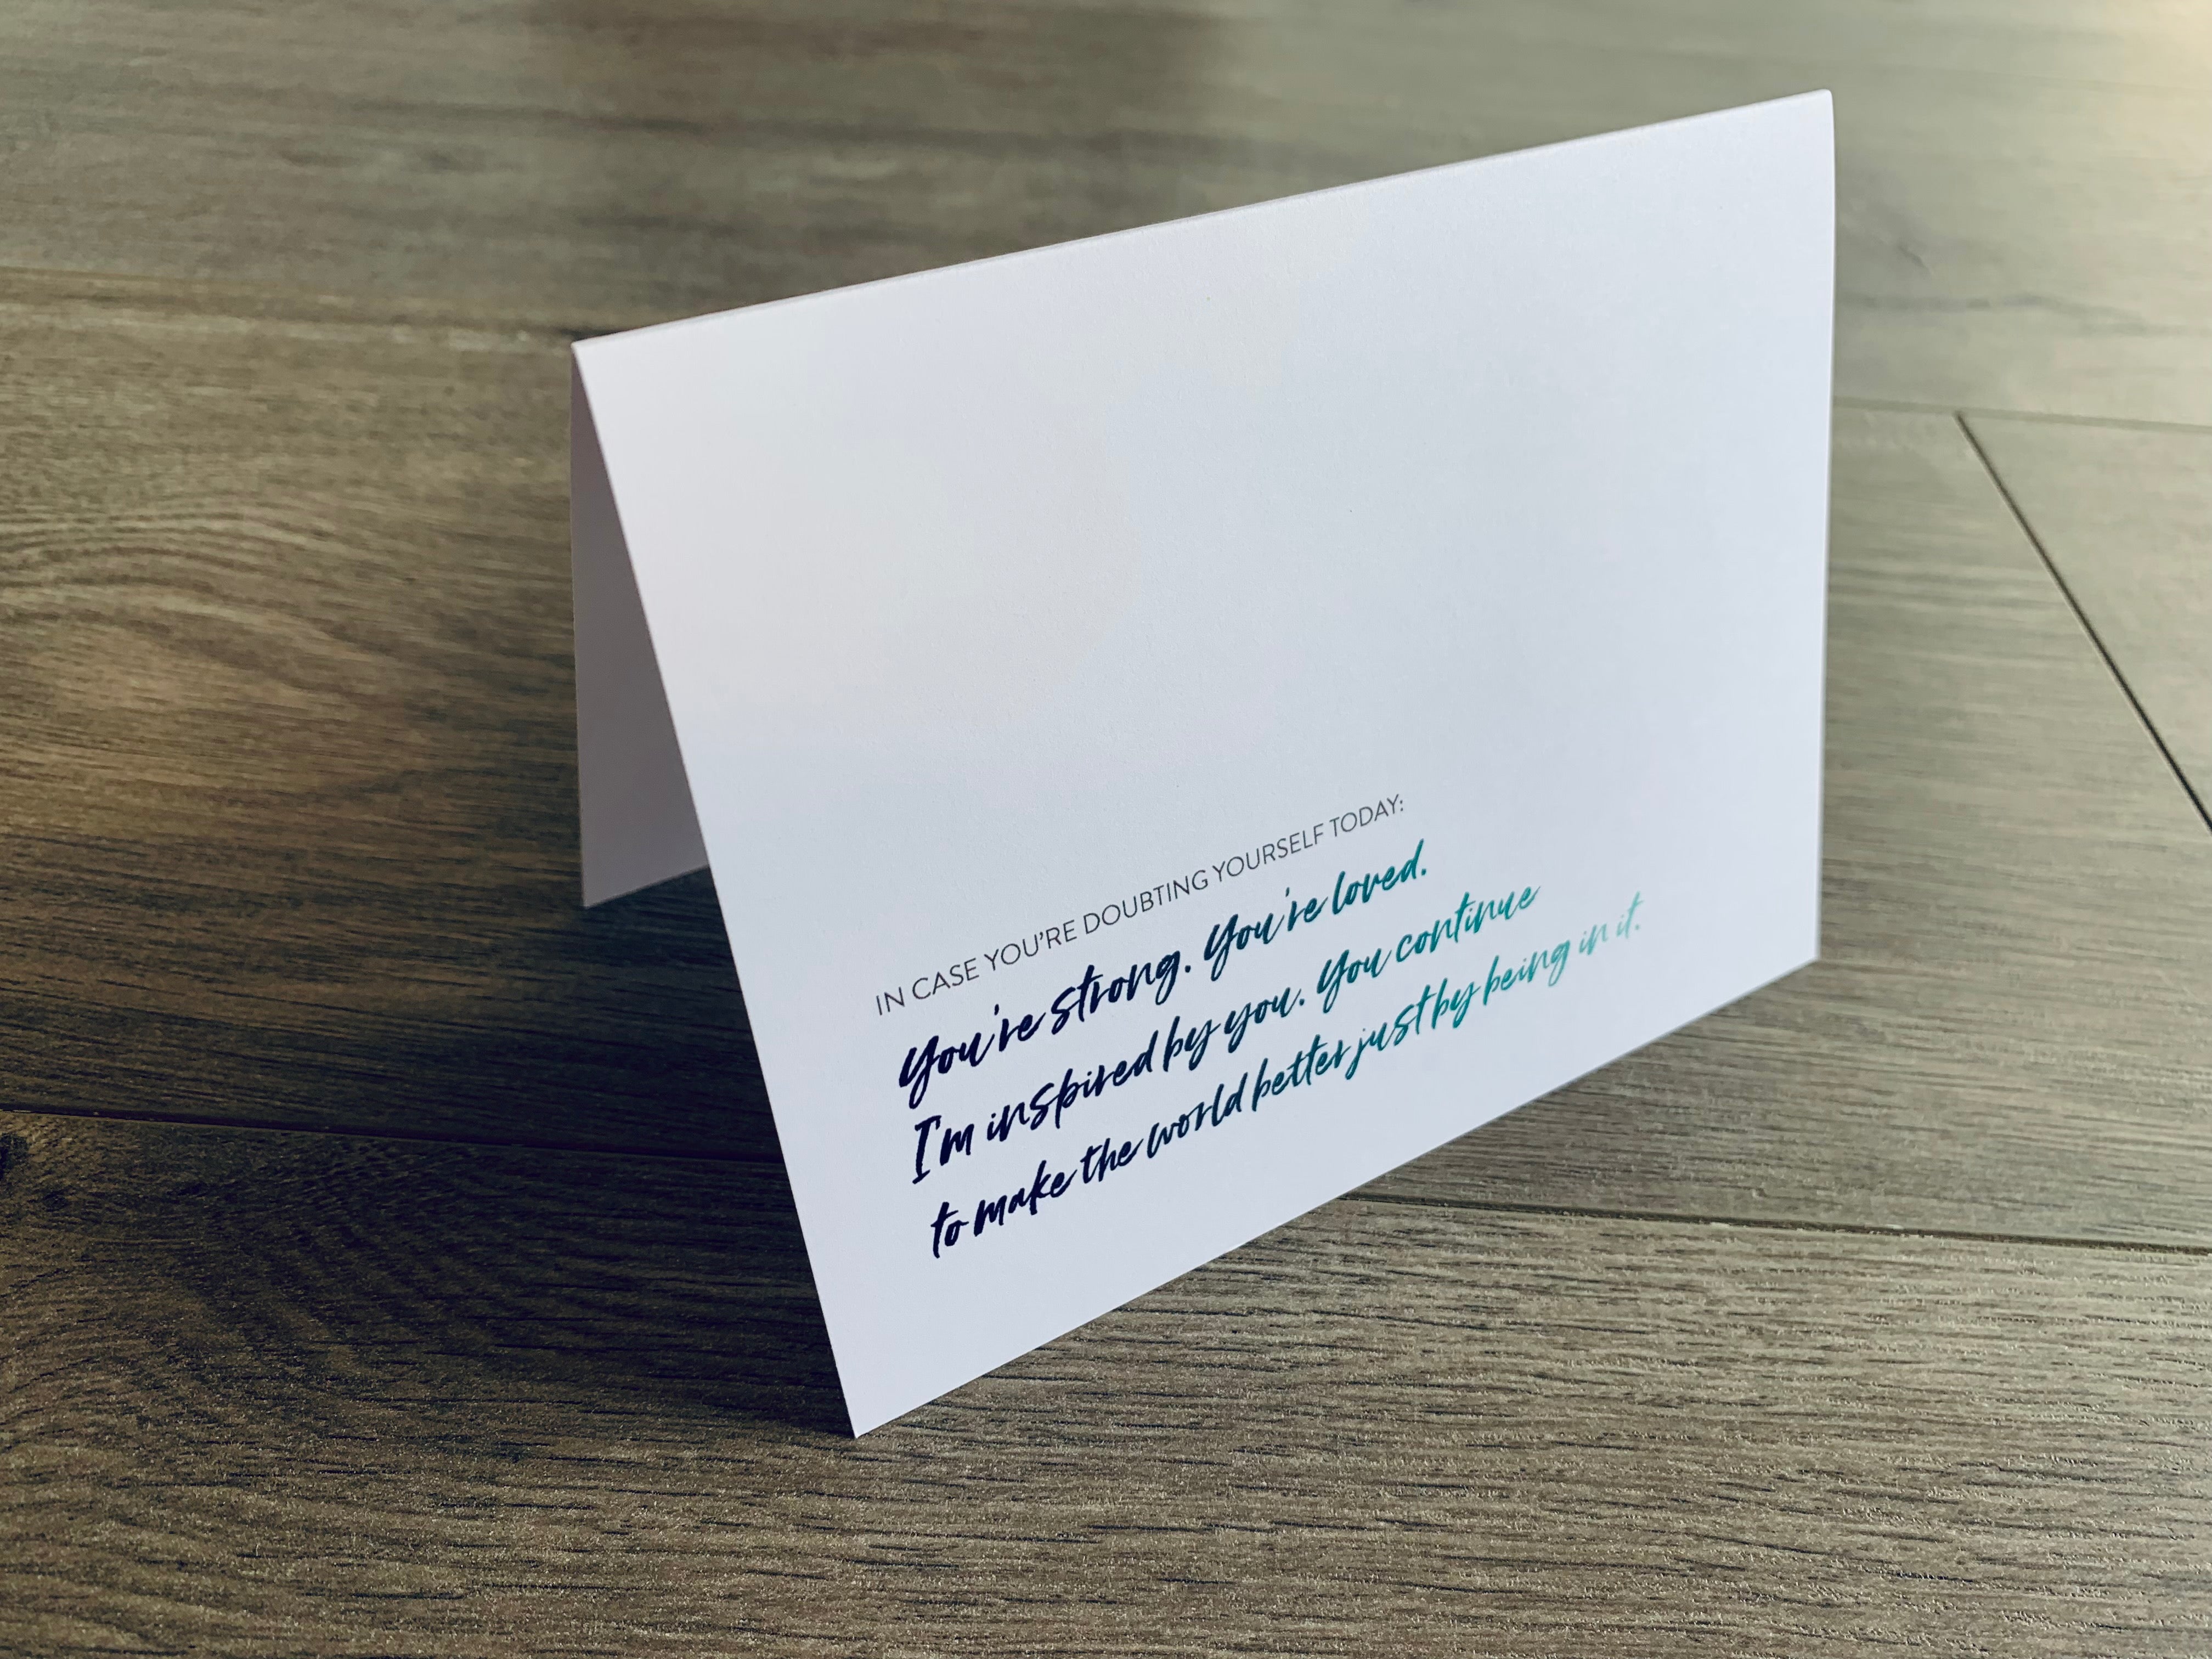 A white, folded notecard is propped up on a gray wooden floor. On the front of the card, it reads, "In case you're doubting yourself today: You're strong. You're loved. I'm inspired by you. You continue to make the world better just by being in it." 